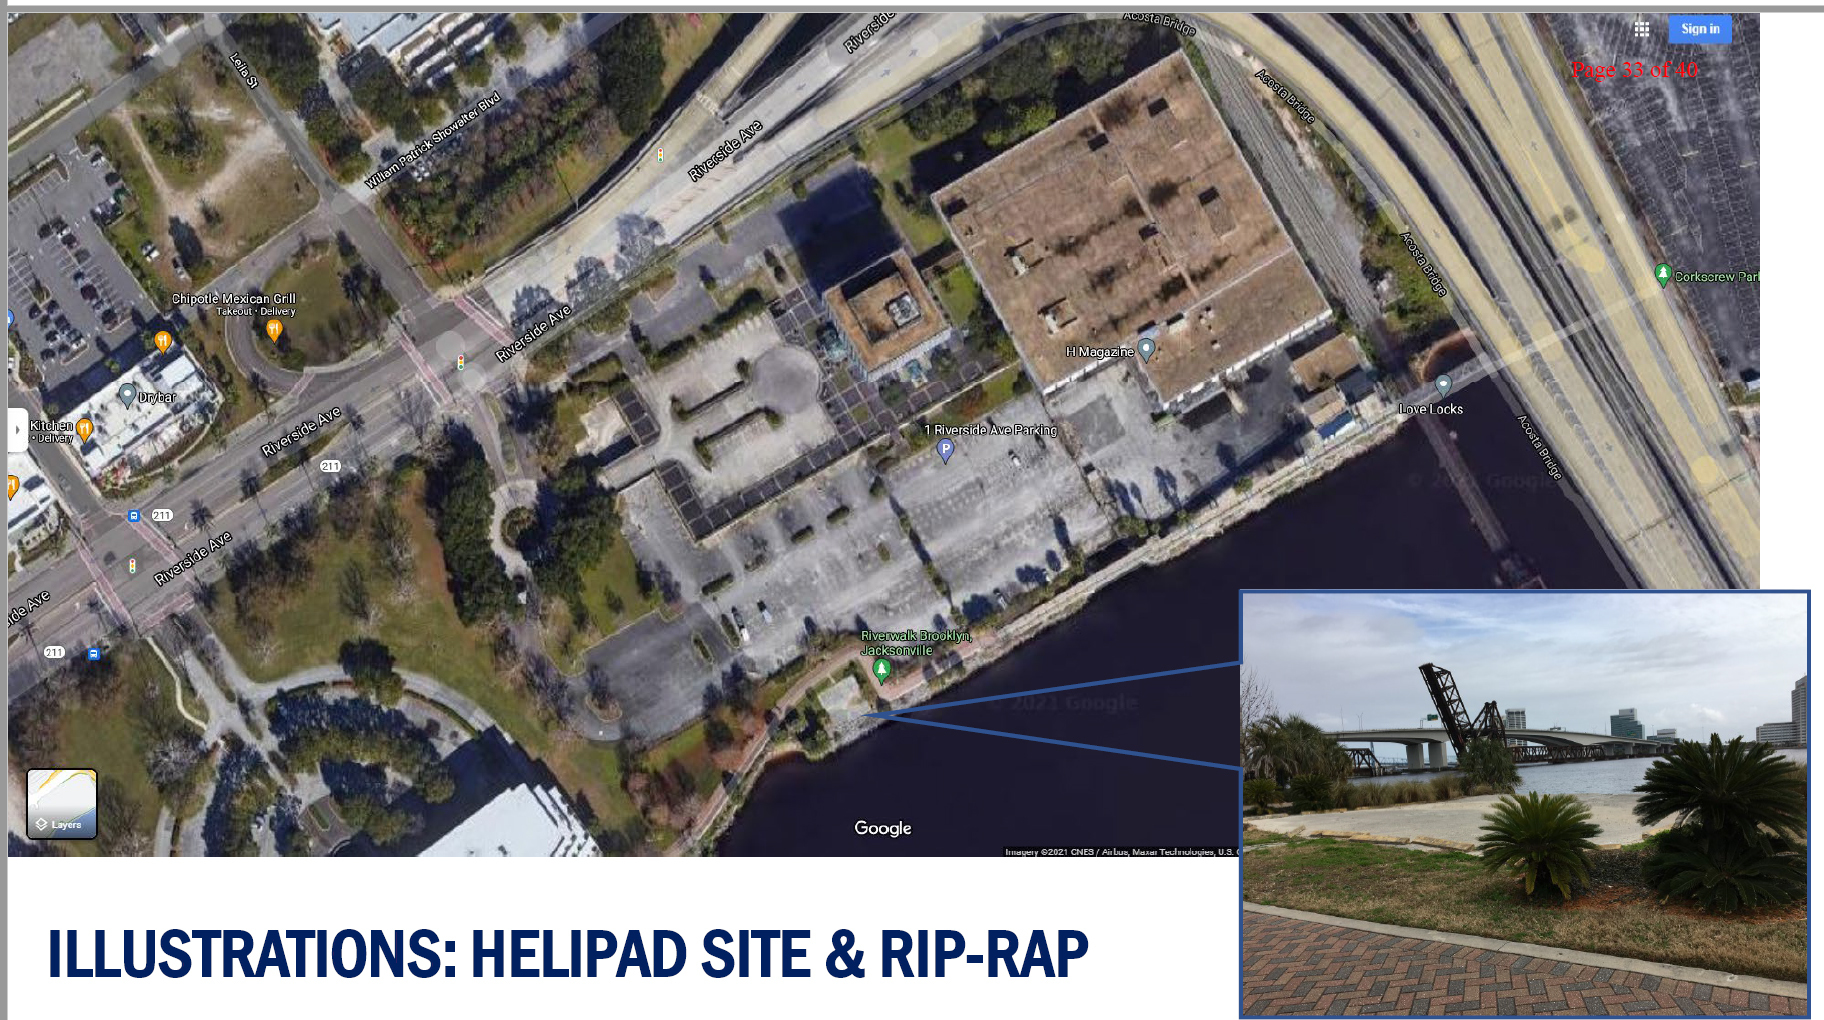 The helipad at the Times-Union site is on the west side of the property.